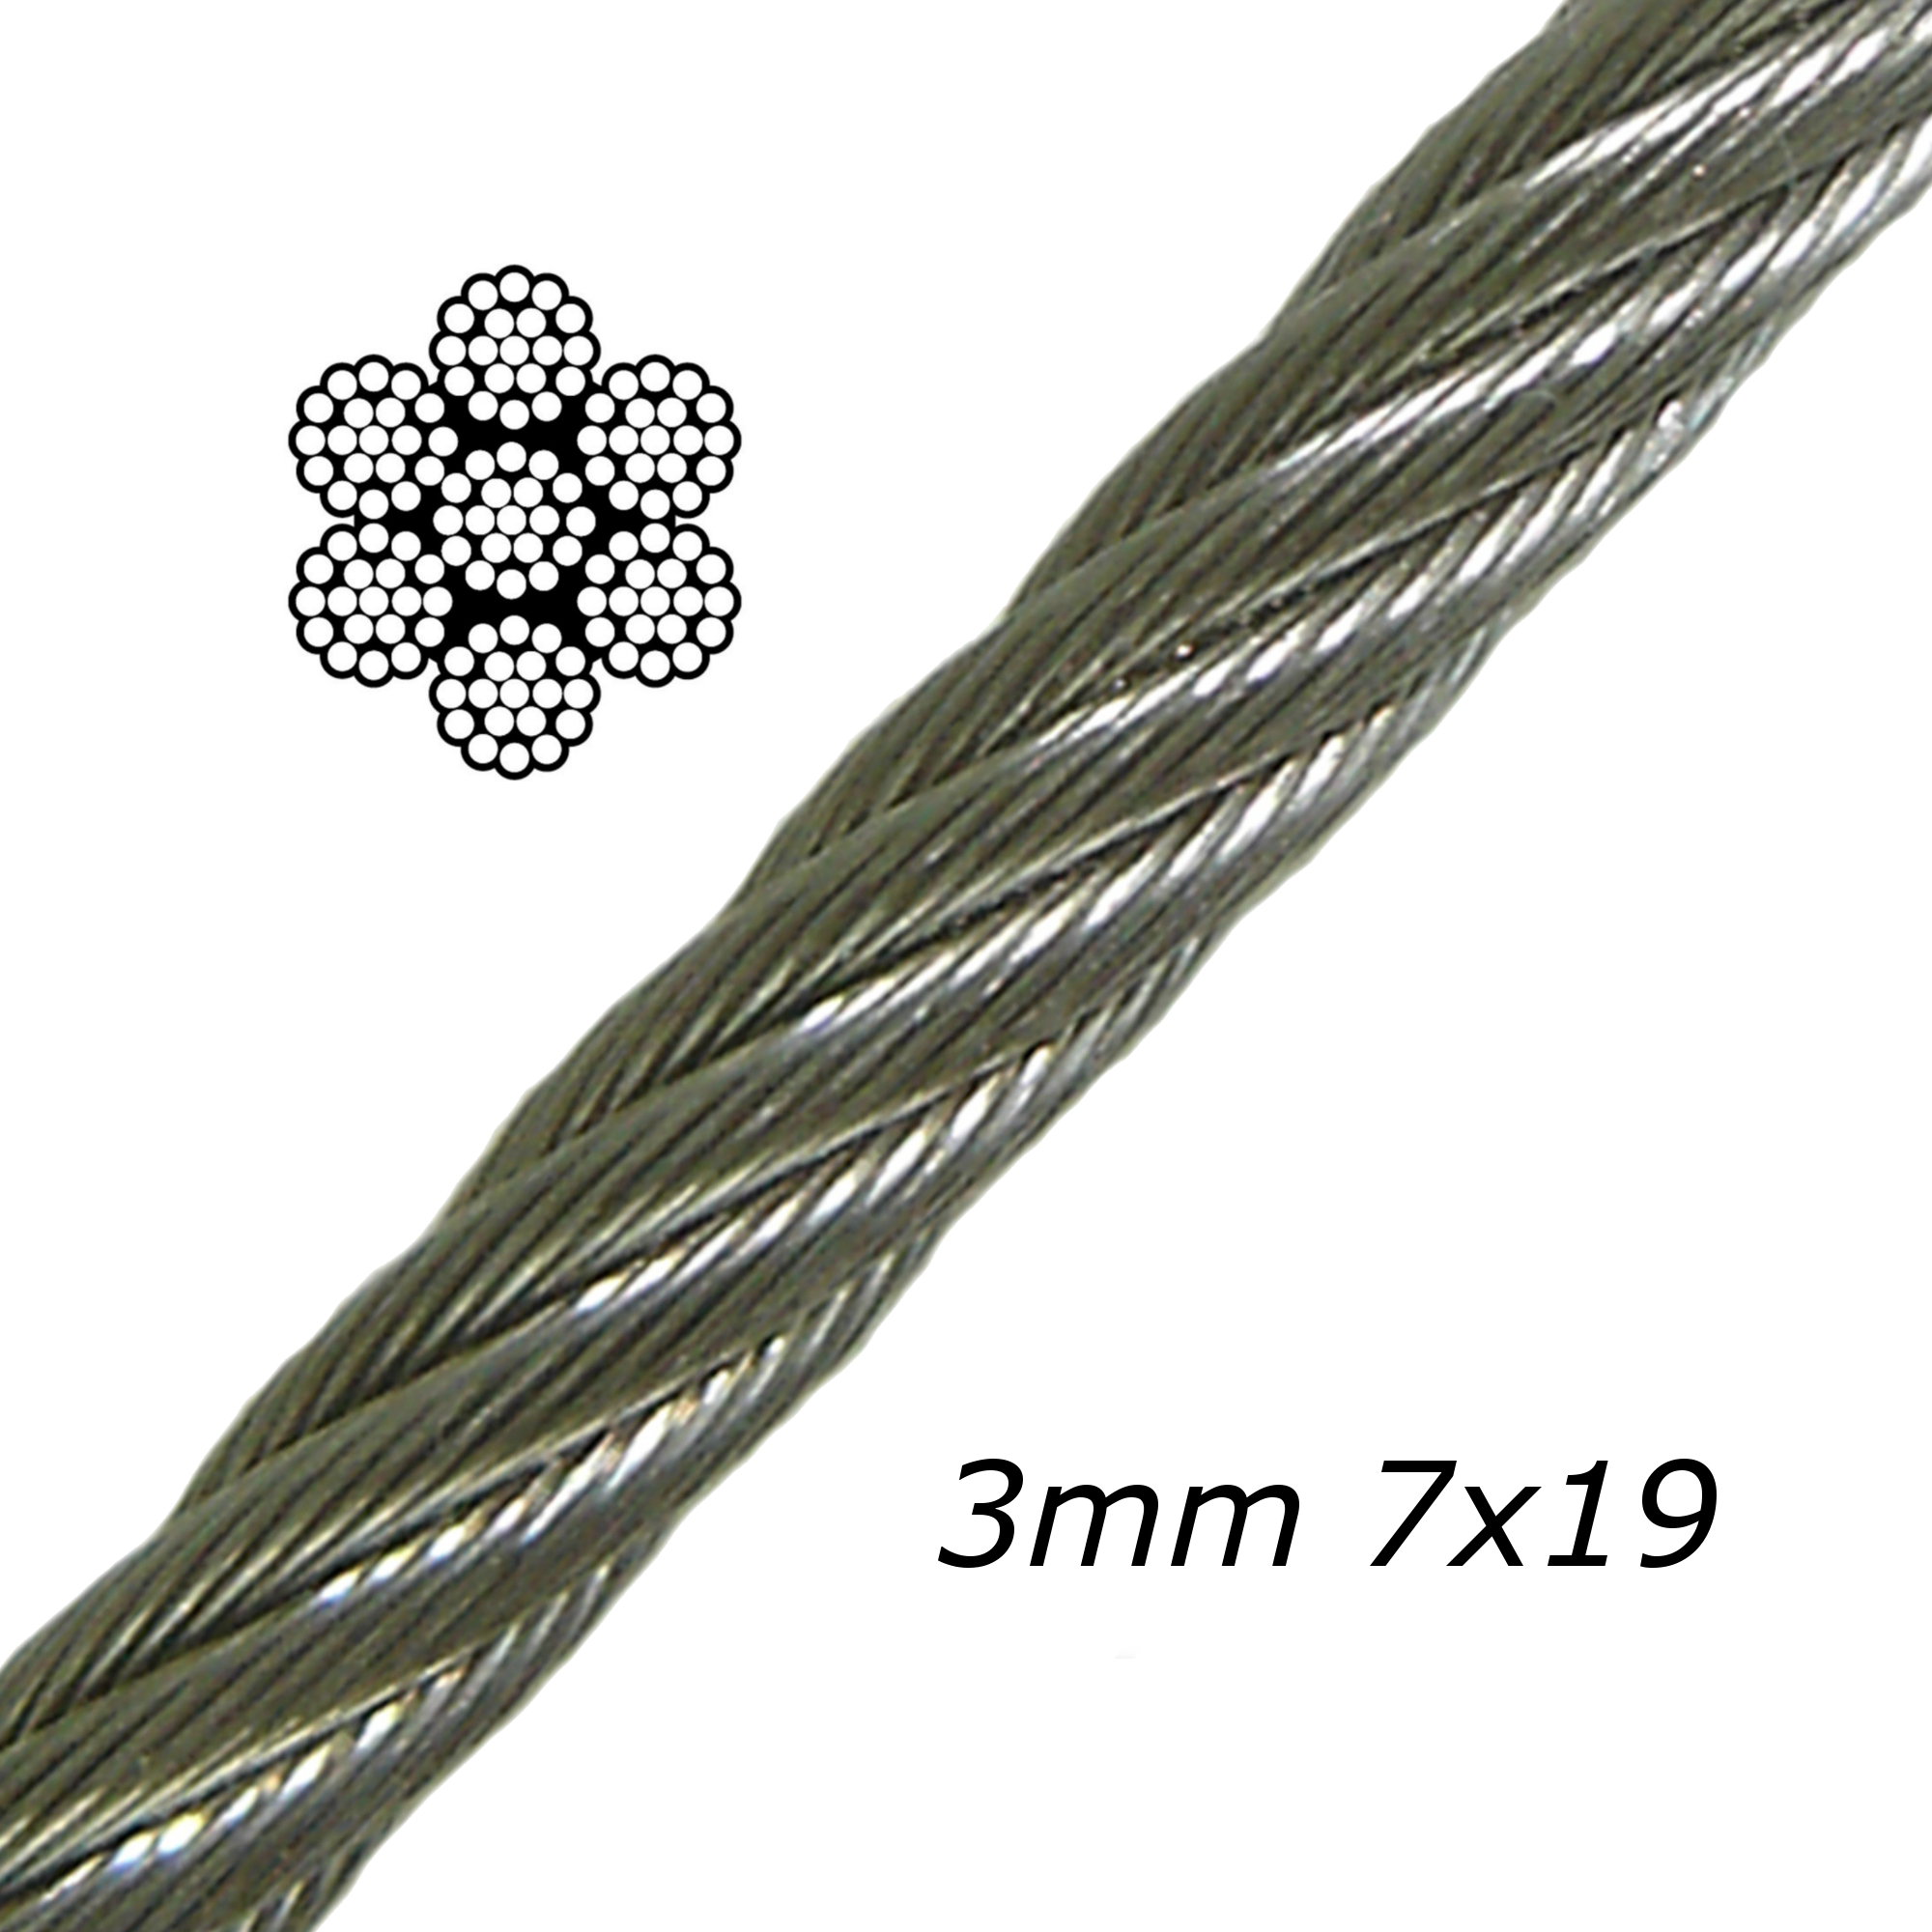 3mm Galvanised steel Cable 7x19